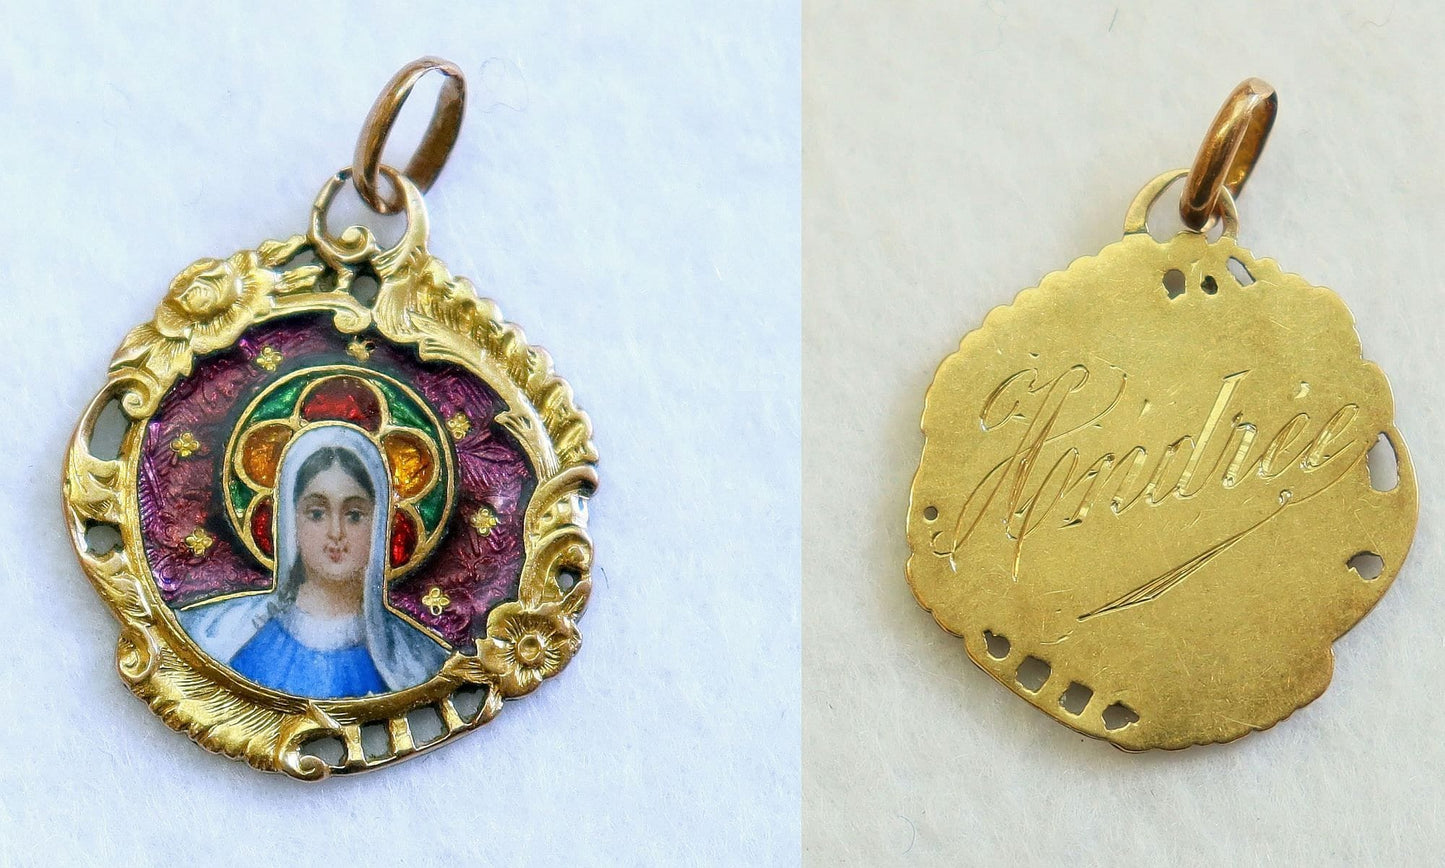 18 K. Solid Gold Hand Painted Polychrome Enameled Medal Pendant Virgin Mary Early 20th Cent. High Rarity